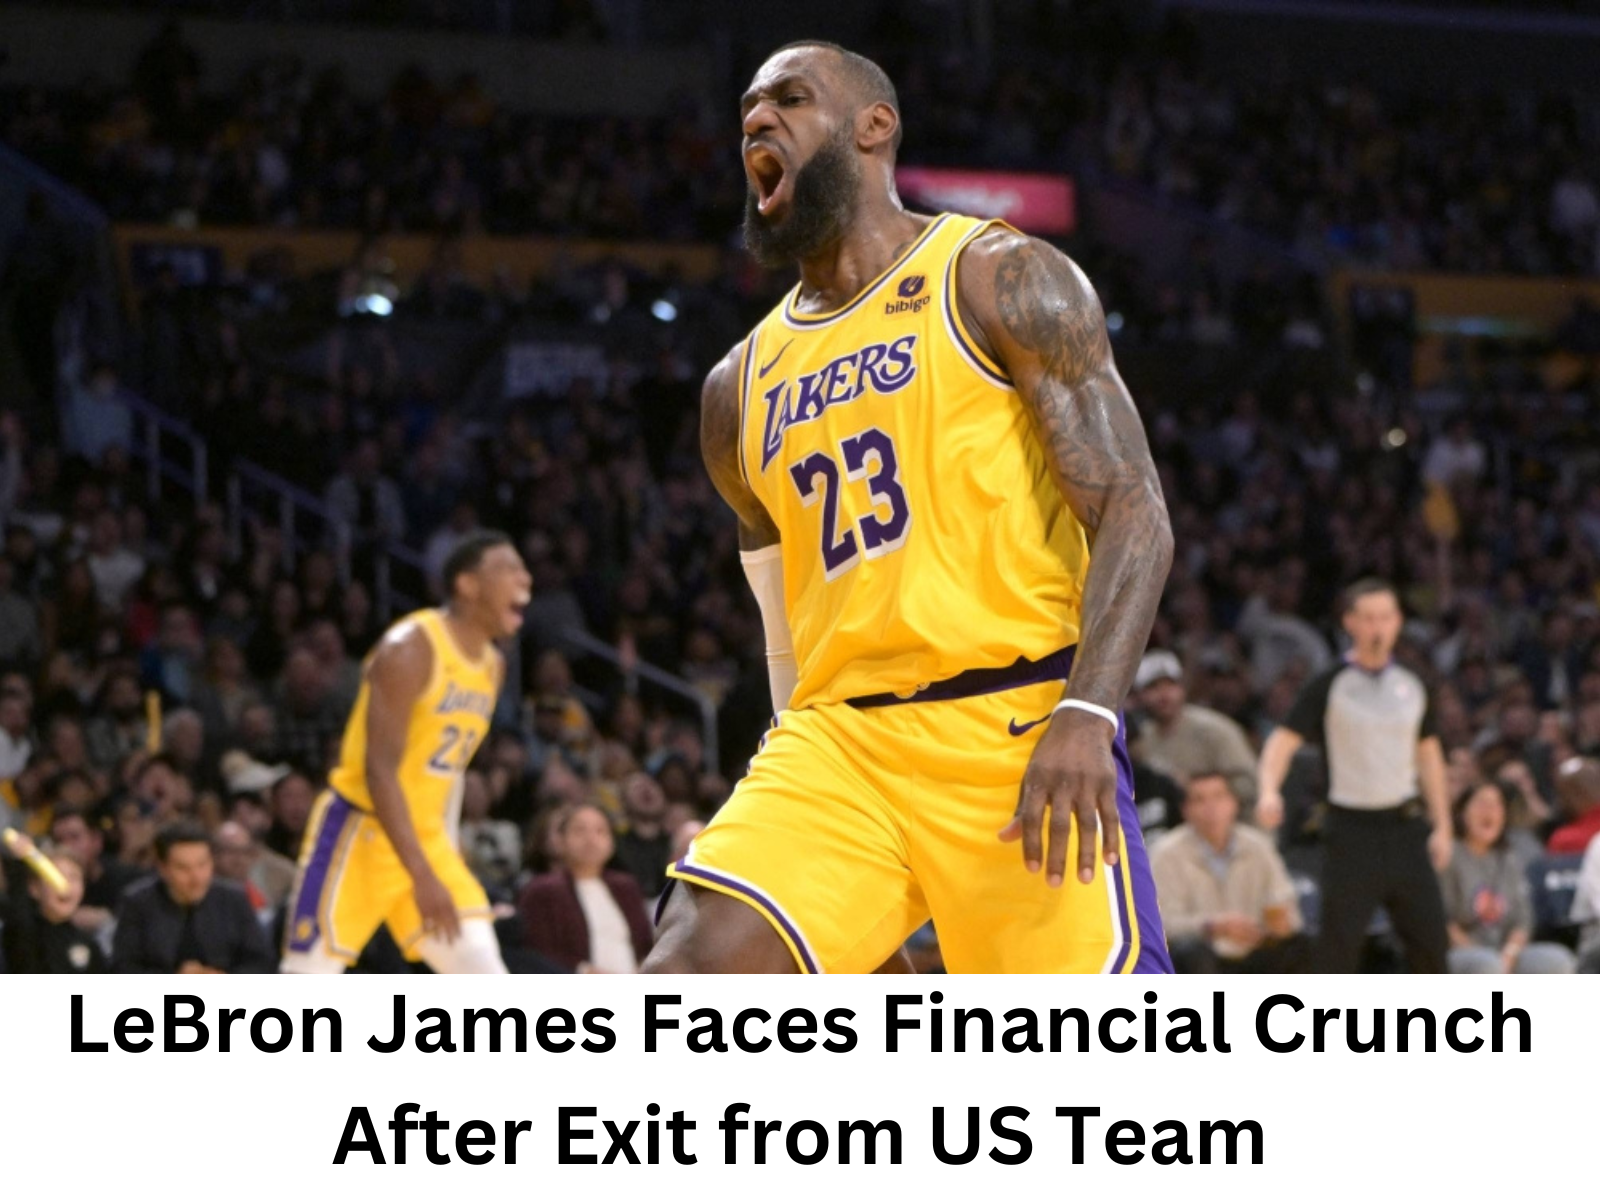 From MVP to VIP (Very Insignificant Pockets): LeBron James’ Financial Foul-Up After US Team Exit